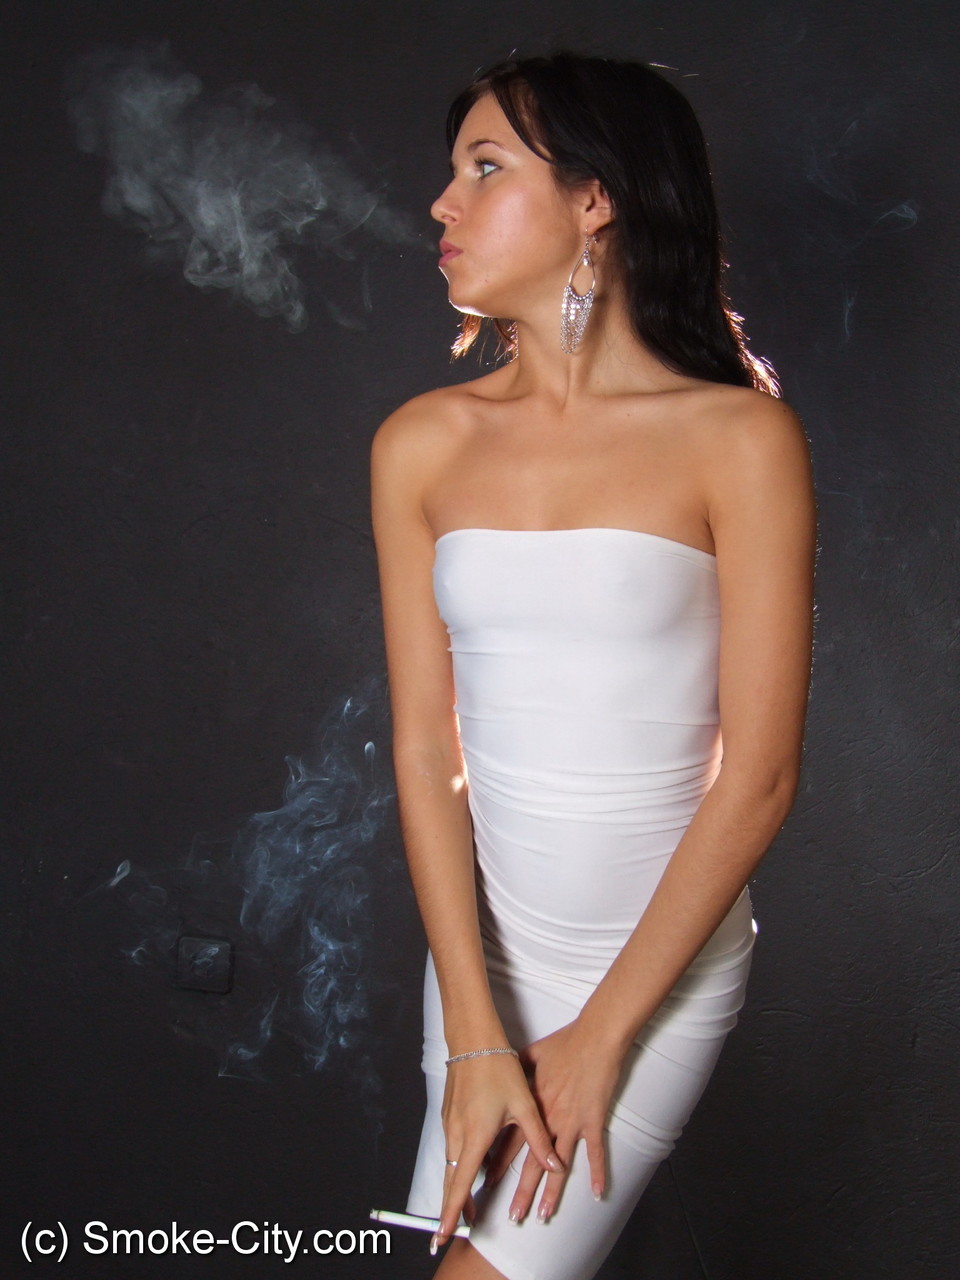 Young brunette smokes a cigarette while wrapped in tight white dress and heels порно фото #426521983